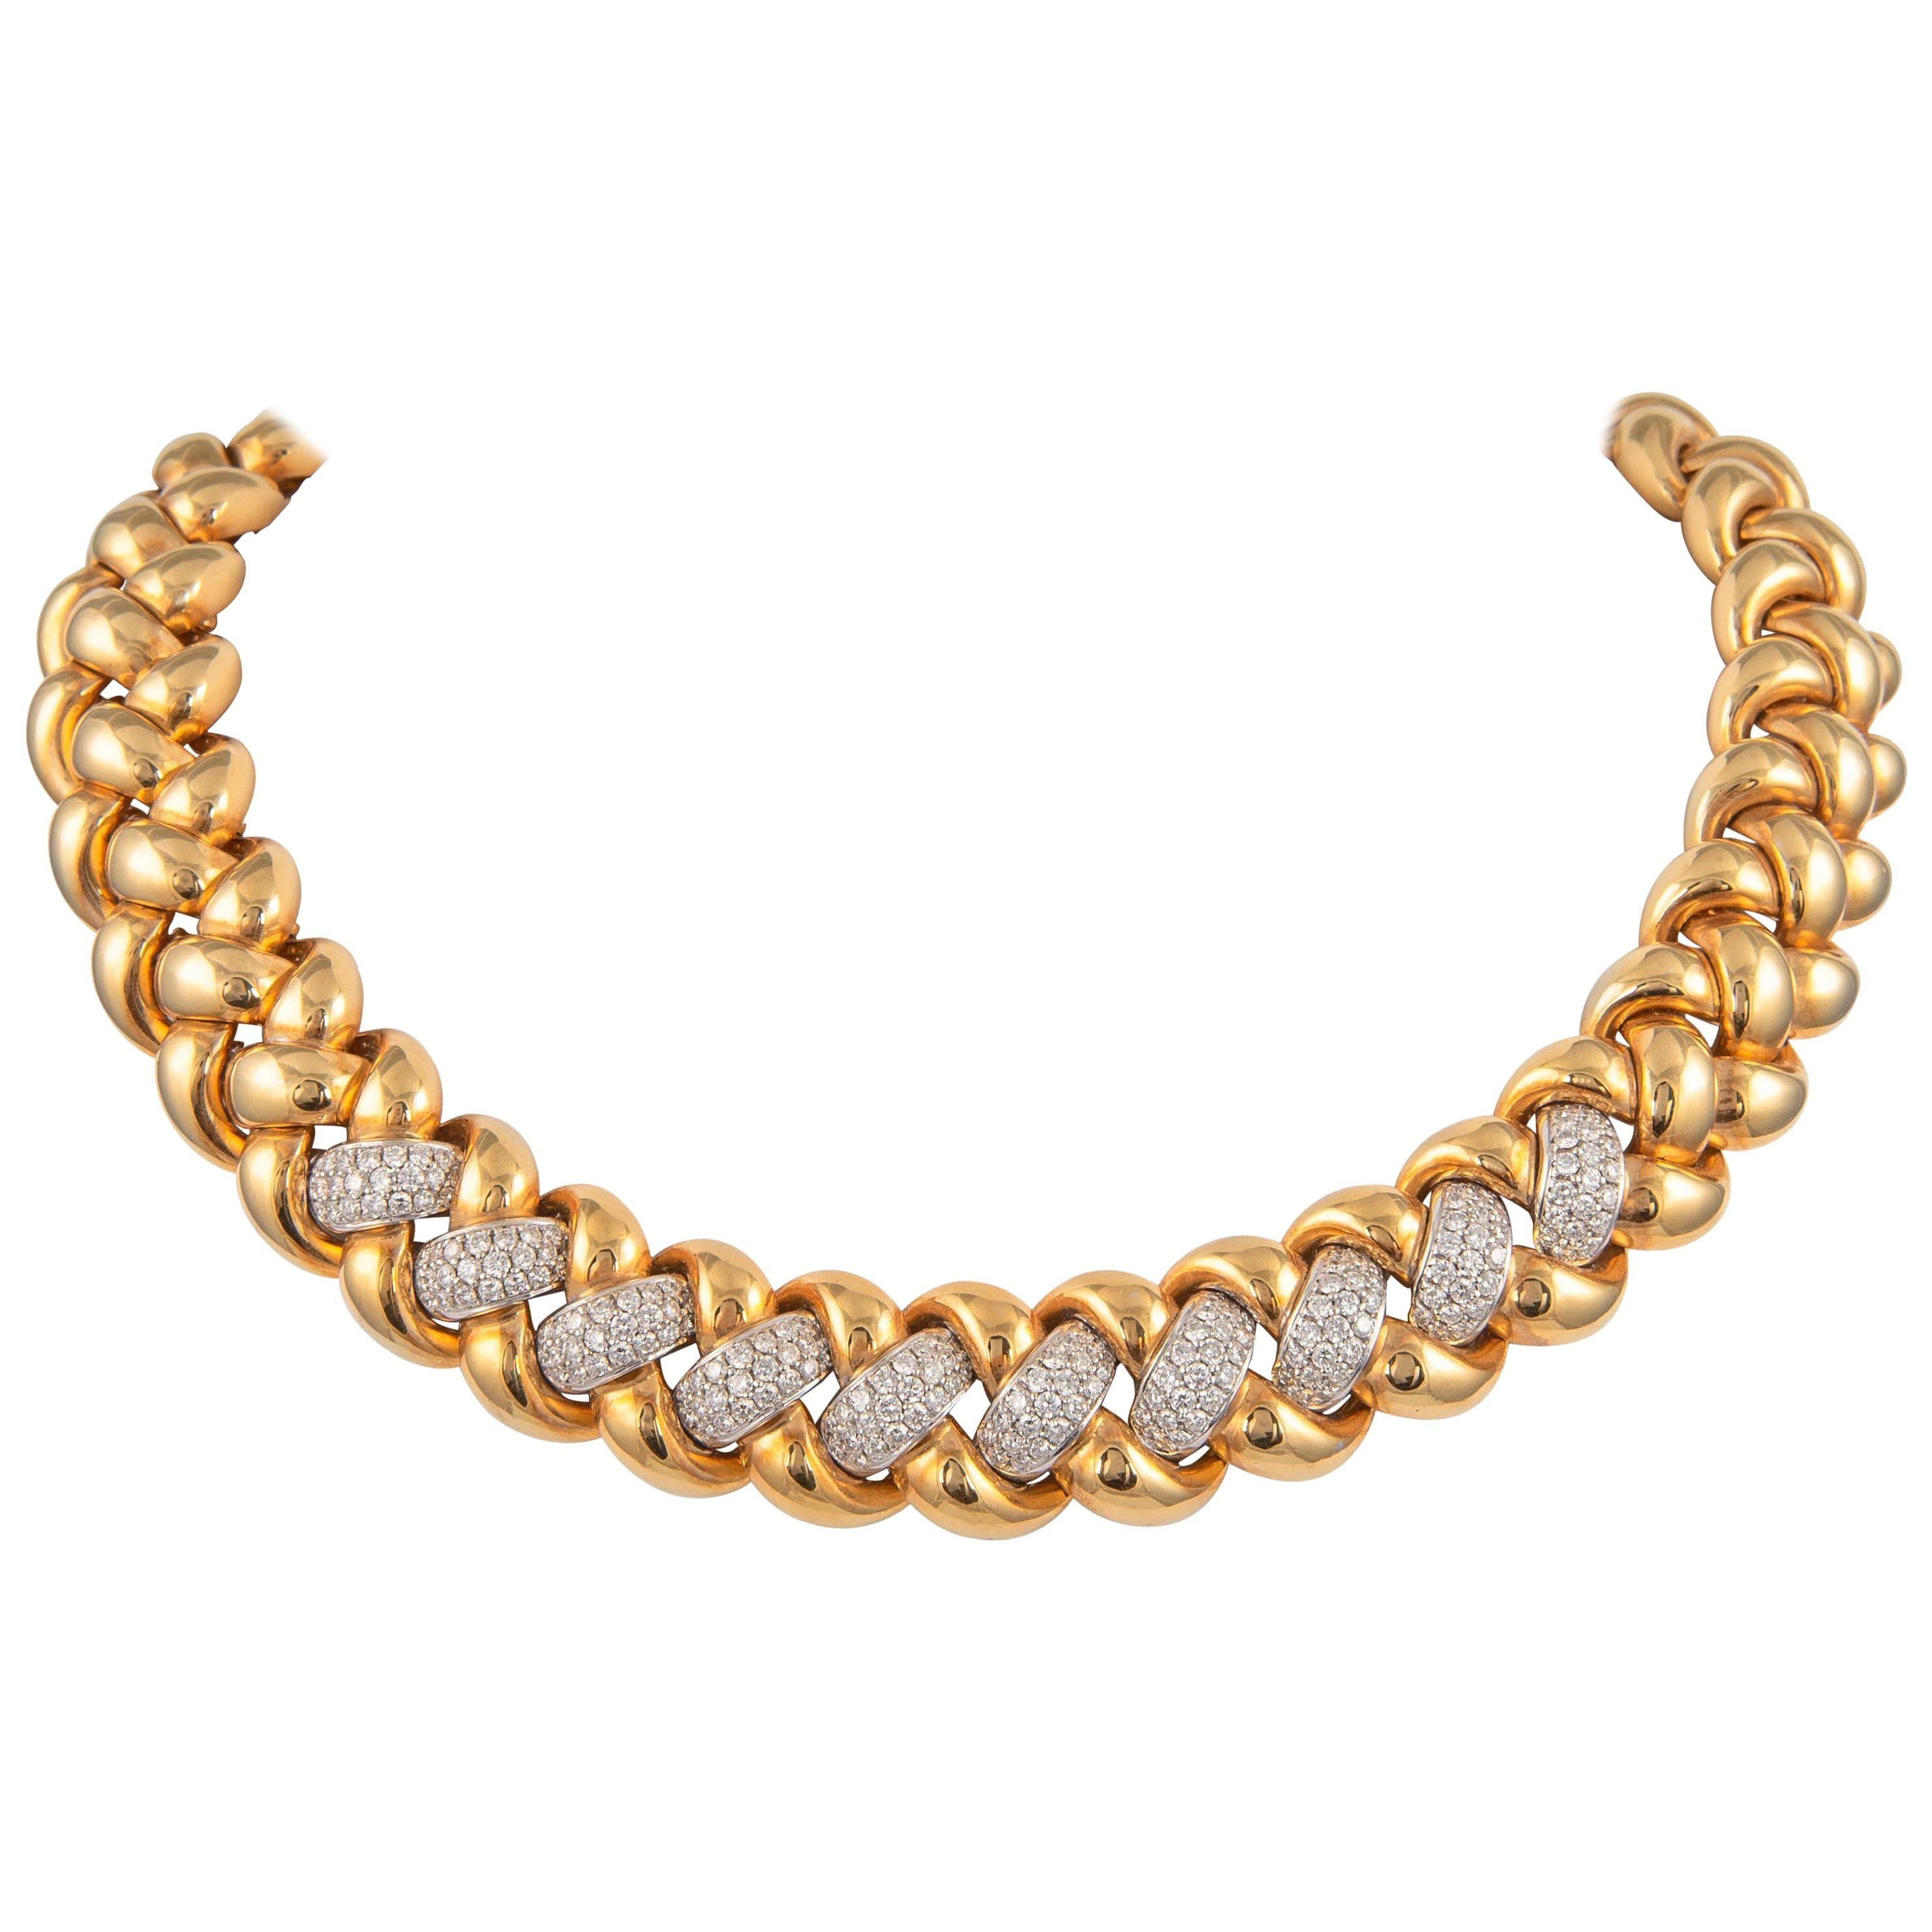 Vintage Retro Style 11 Carat Diamond and 18 Karat Yellow Gold Necklace 209.43gr For Sale